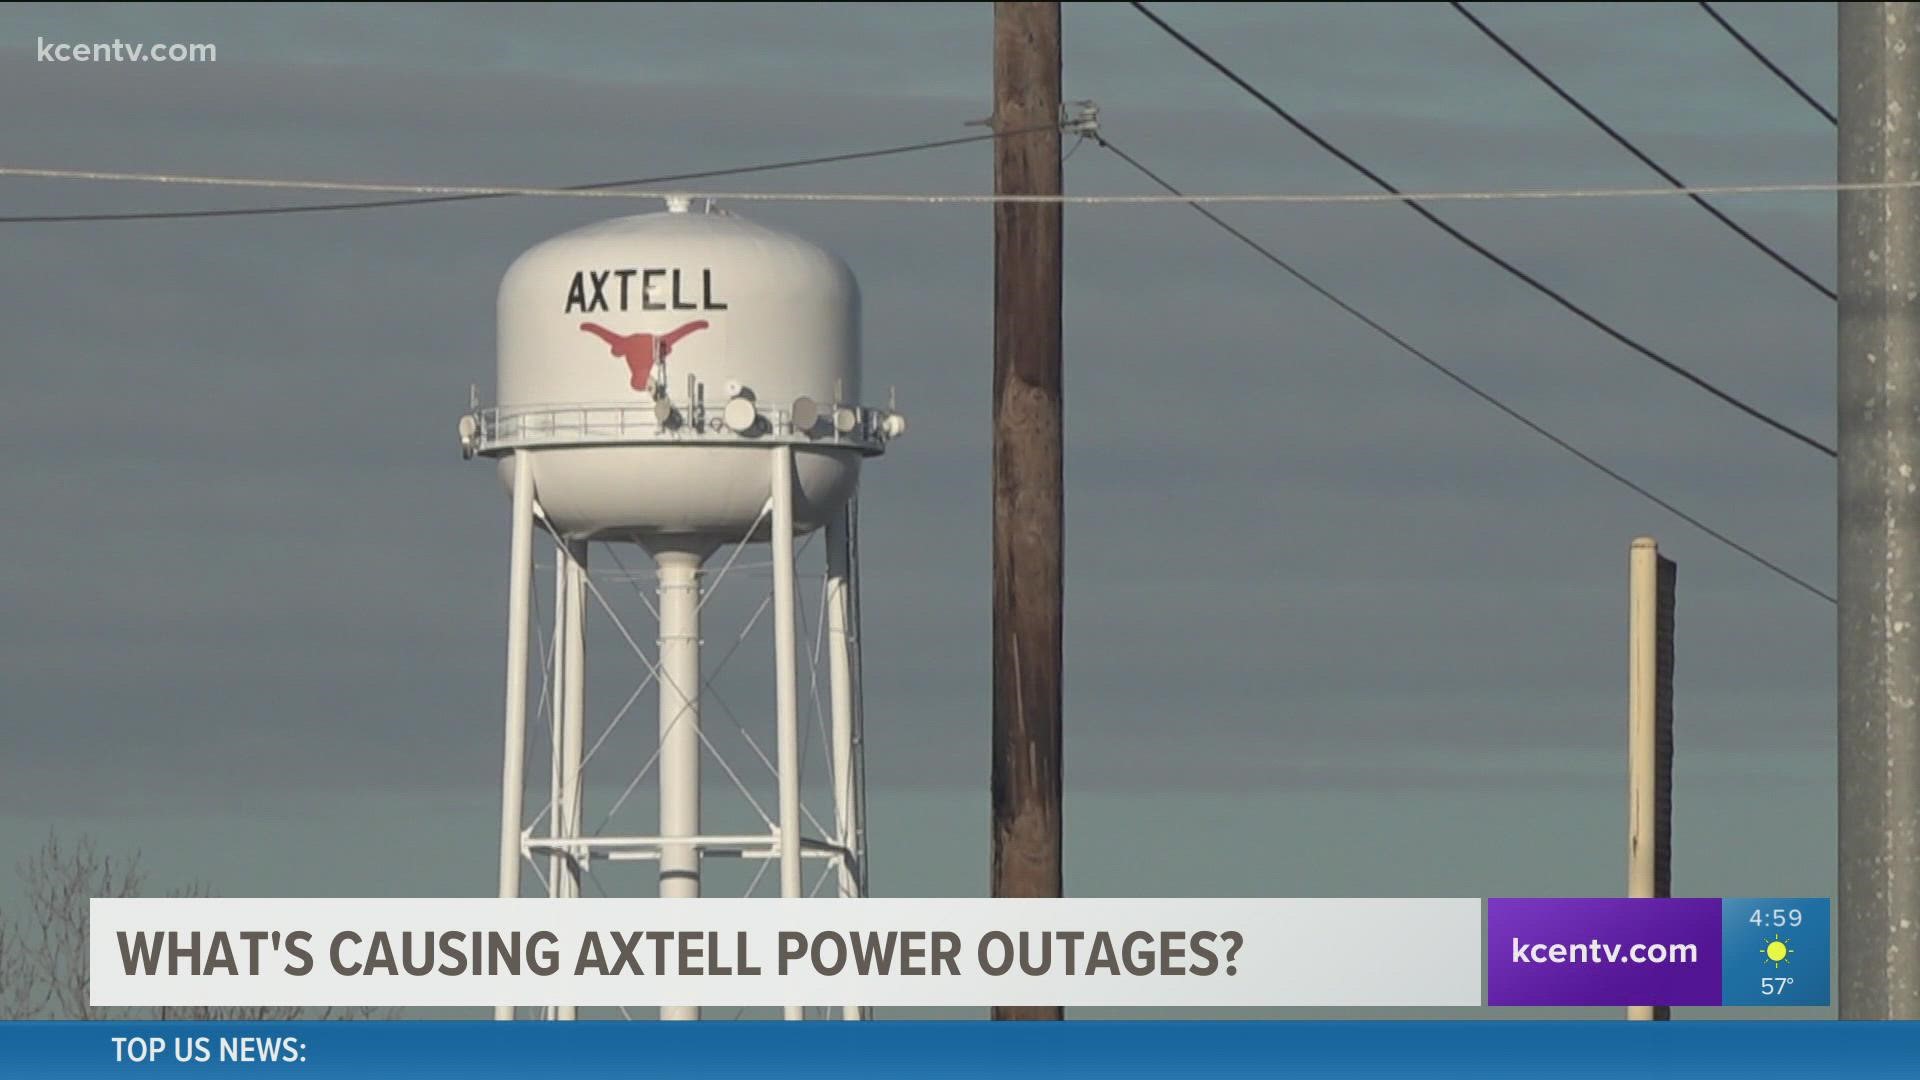 Residents in Axtell said power flickers on and off, sometimes it goes off for hours. 6 News reached out to Oncor to find out what's going on.